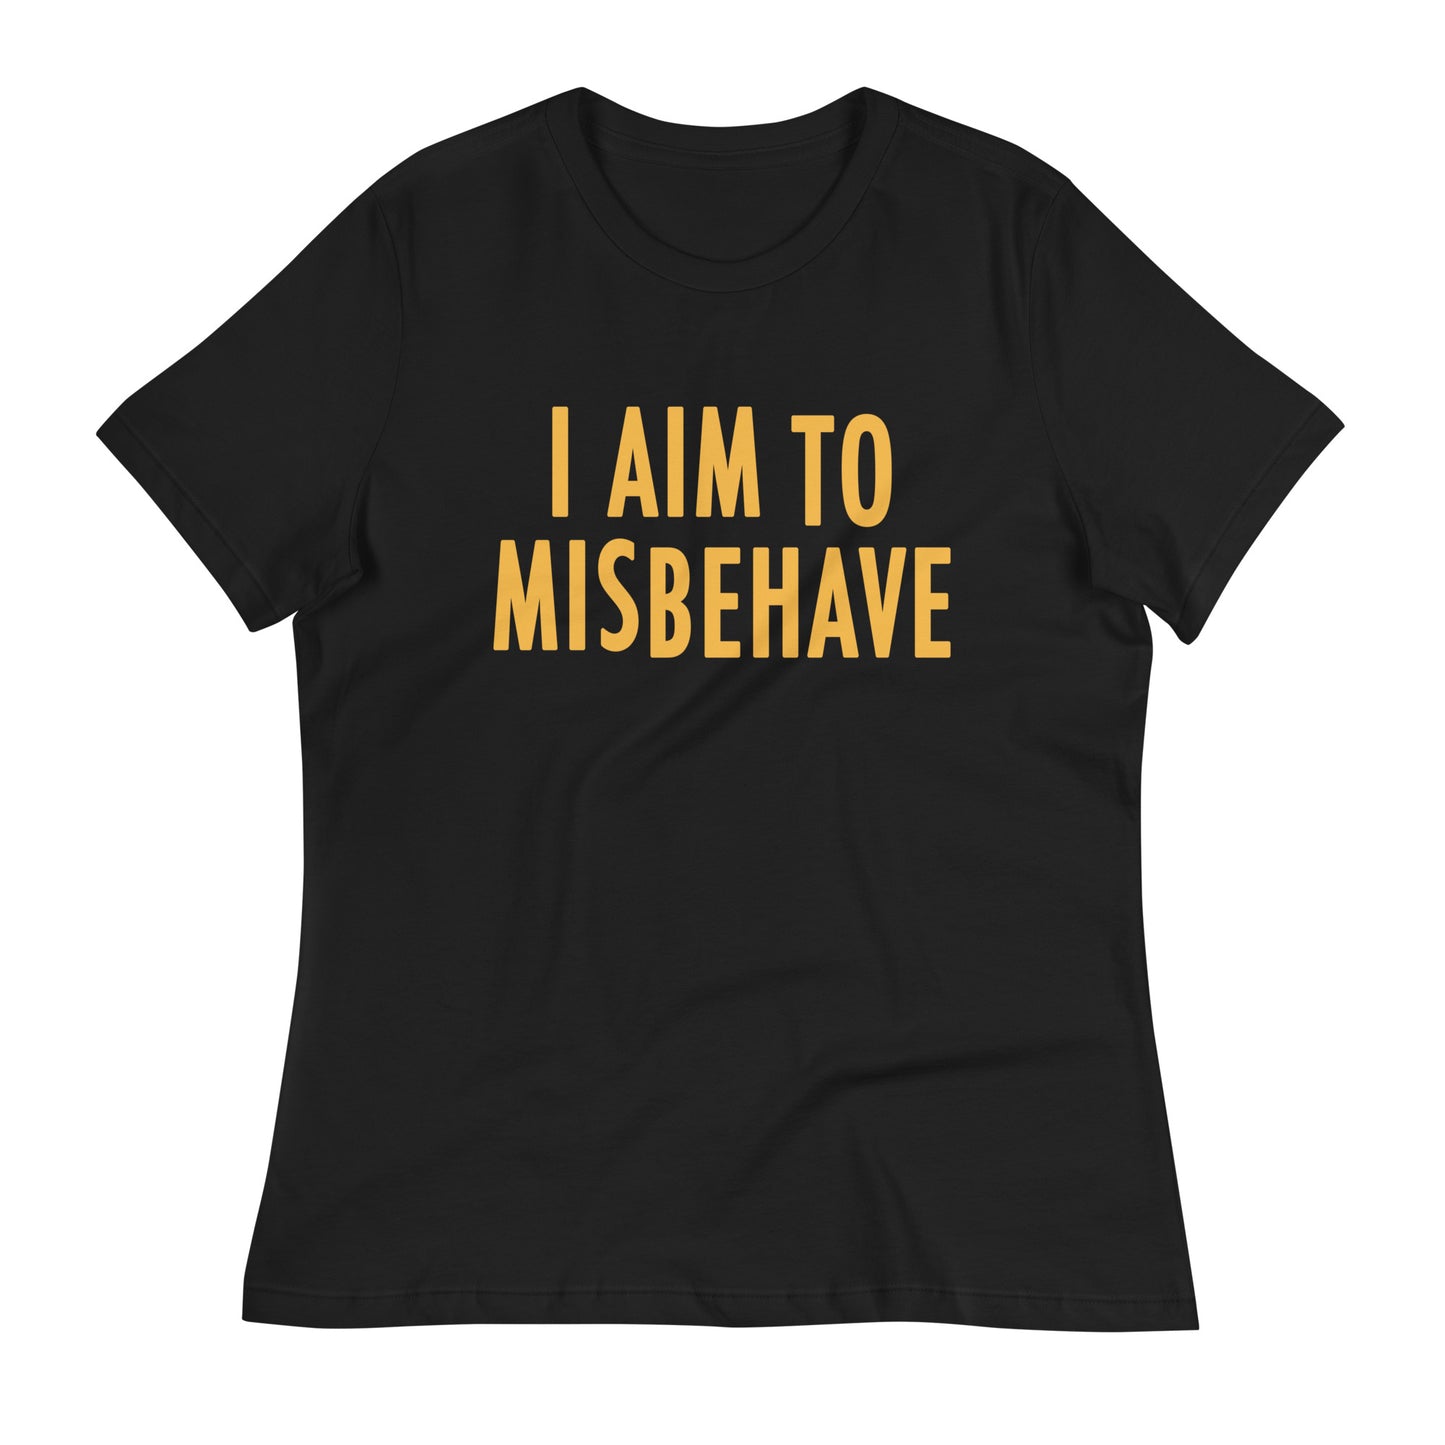 I Aim To Misbehave Women's Signature Tee